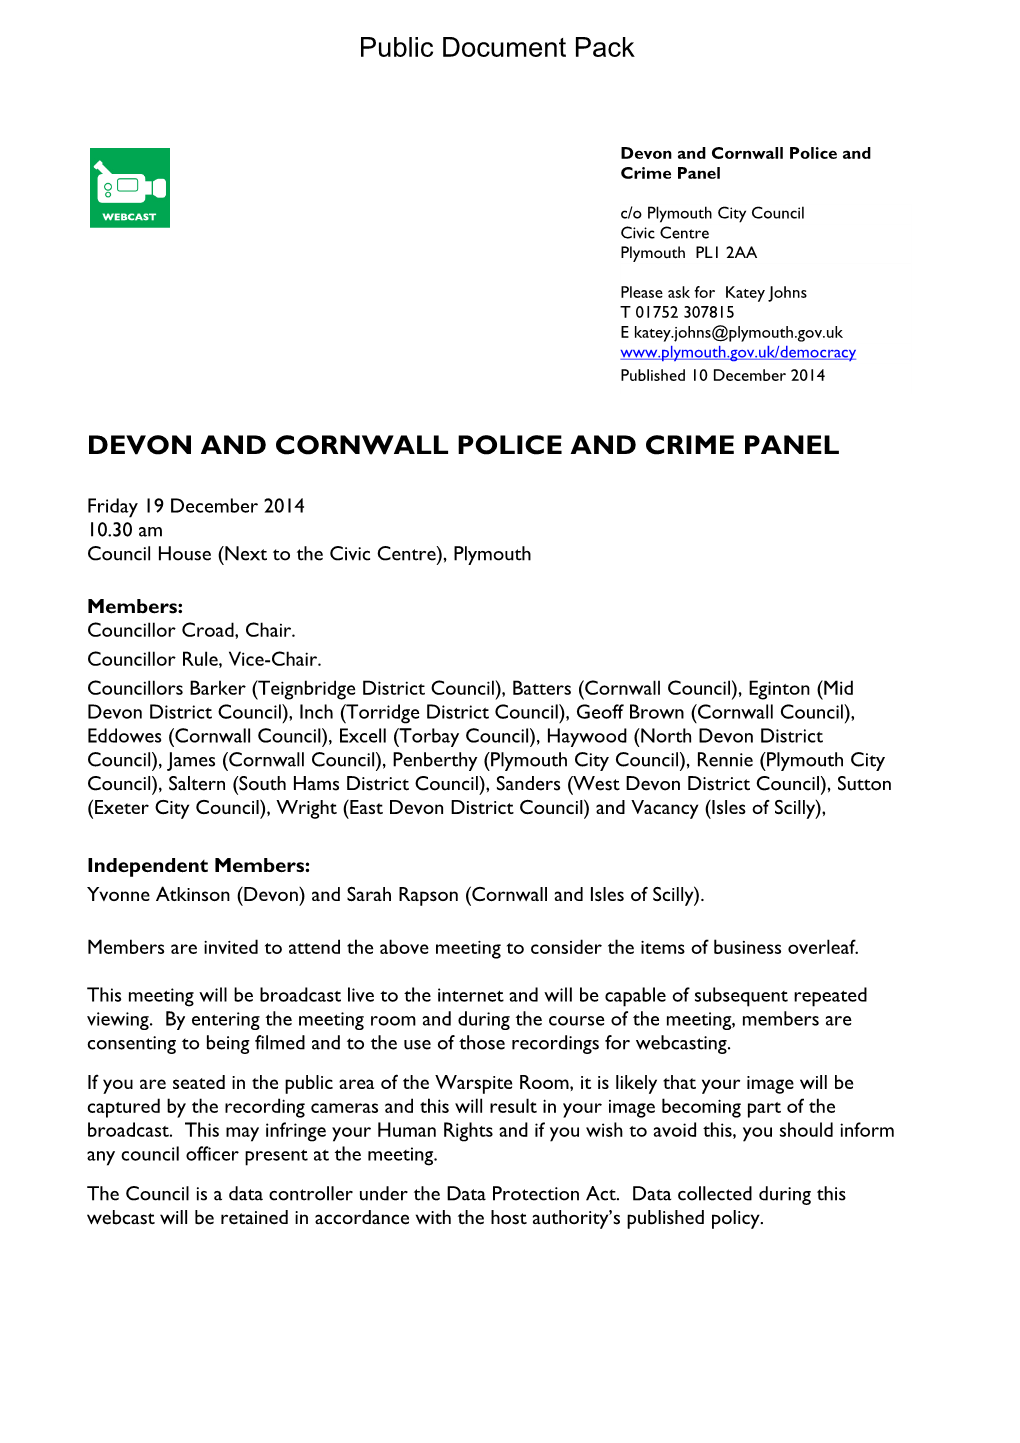 (Public Pack)Agenda Document for Devon and Cornwall Police And